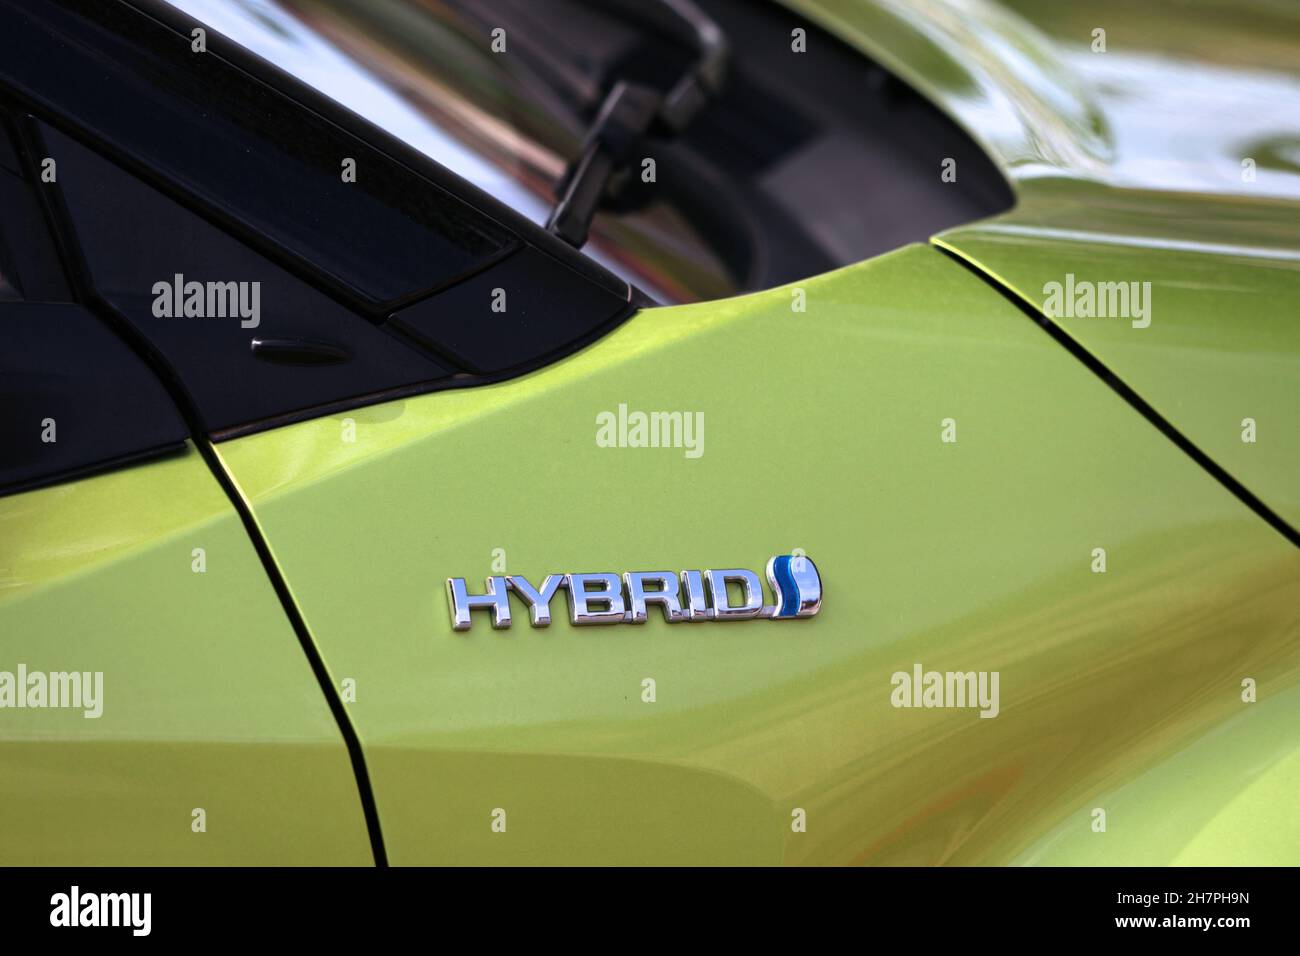 BARCELONA, SPAIN - OCTOBER 7, 2021: Hybrid marking on a Toyota car in Spain. Modern hybrid cars are partially powered by electricity. Stock Photo